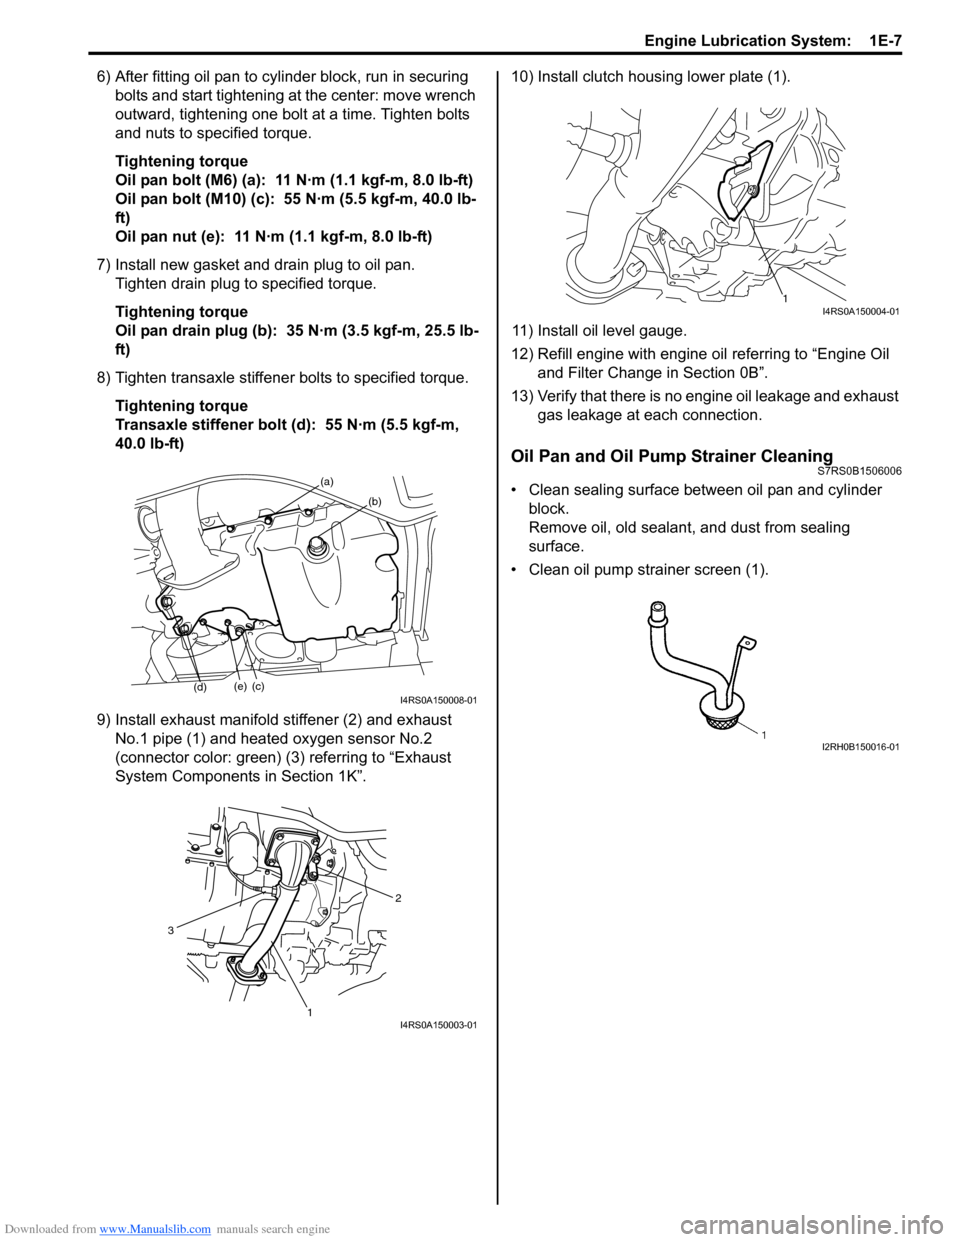 SUZUKI SWIFT 2006 2.G Service Owners Manual Downloaded from www.Manualslib.com manuals search engine Engine Lubrication System:  1E-7
6) After fitting oil pan to cylinder block, run in securing bolts and start tightening at the center: move wre